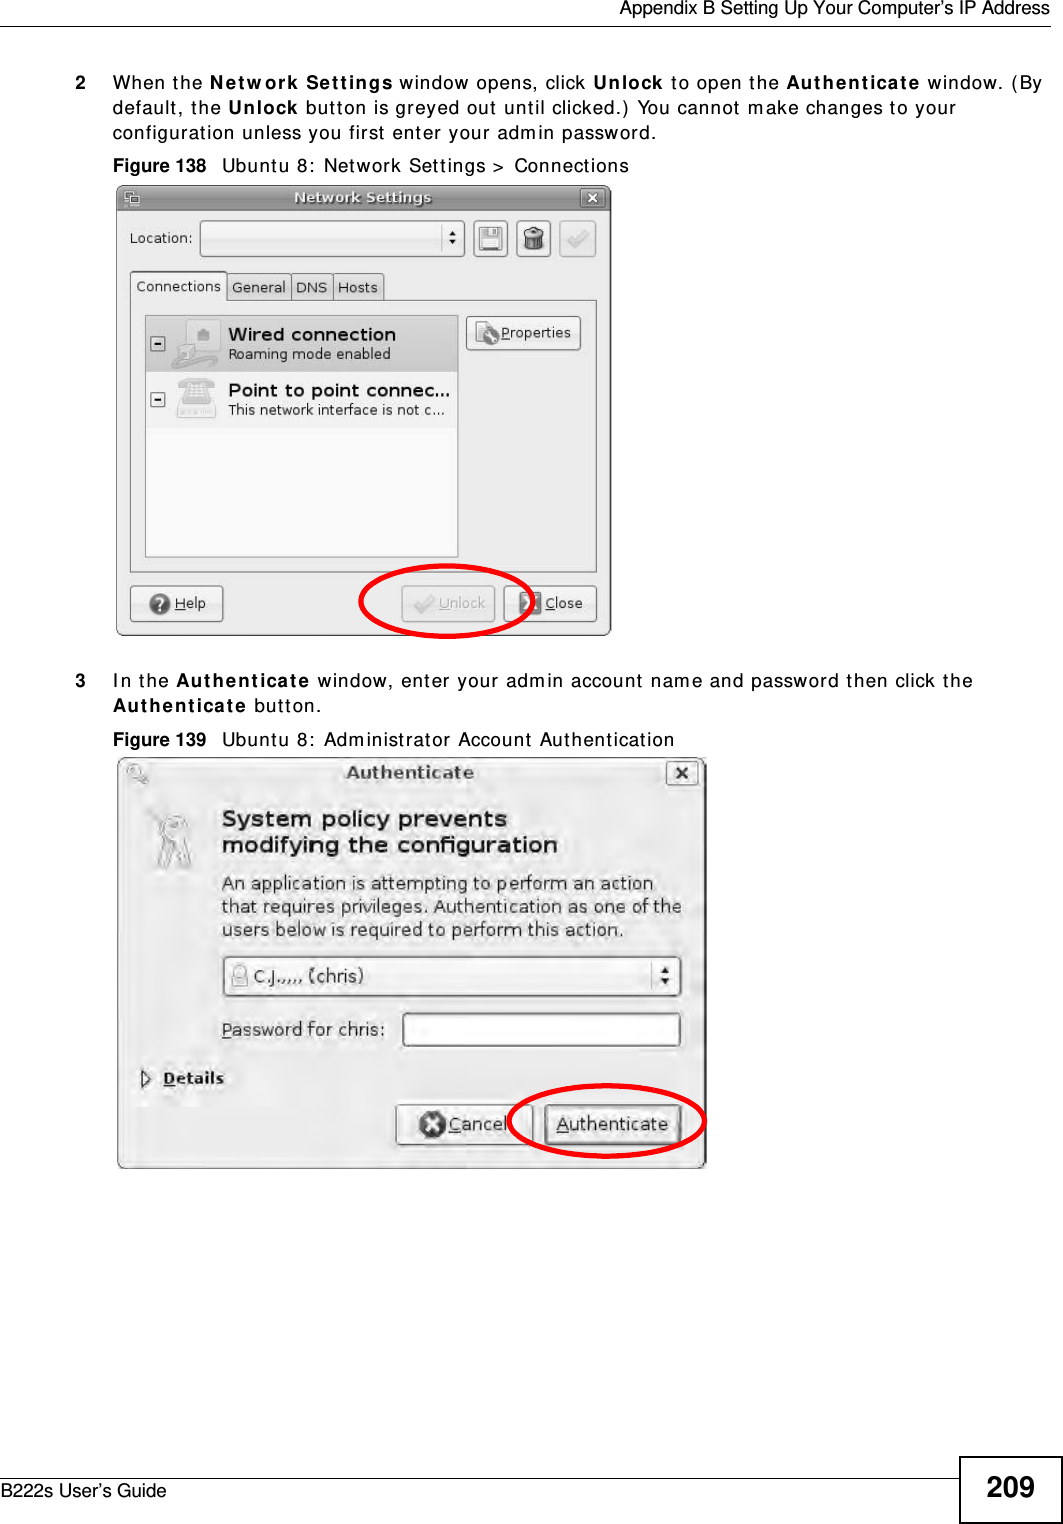  Appendix B Setting Up Your Computer’s IP AddressB222s User’s Guide 2092When the N e t w or k  Set t ings window  opens, click Unlock  t o open t he Au t he n t ica t e window. ( By default, t he Unlock butt on is greyed out until clicked.)  You cannot  m ake changes t o your configurat ion unless you first  enter your adm in password.Figure 138   Ubunt u 8:  Network Sett ings &gt;  Connect ions3I n t he Au t he nt ica t e  window, ent er your adm in account  nam e and password t hen click the Au t he n t ica t e butt on.Figure 139   Ubunt u 8:  Adm inistrator Account  Aut hent icat ion